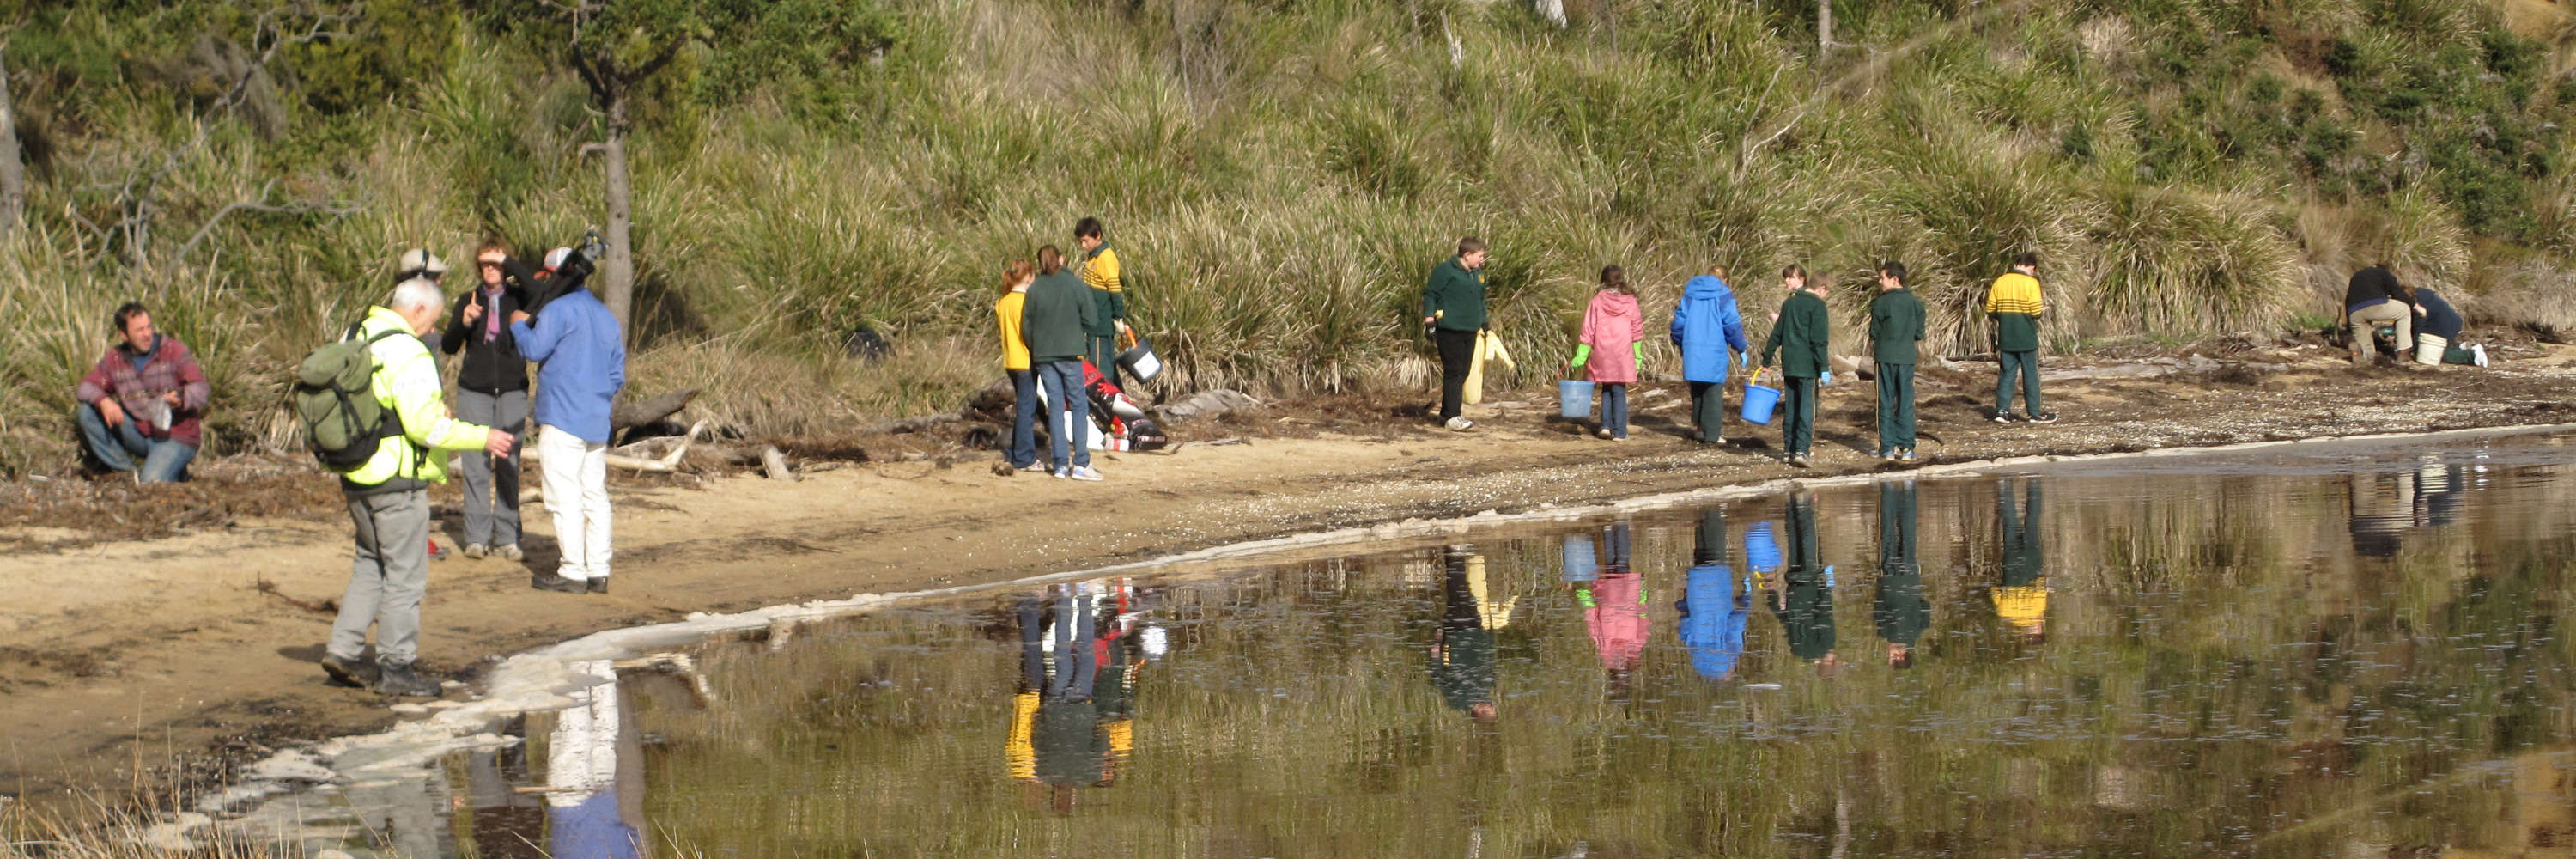 A group of people of all ages are scattered along a sandy water’s edge, surrounded by tall grass and reeds, collecting plastic in buckets. In the foreground, a child holds up a bottle. Photo: Andrew Hughes.